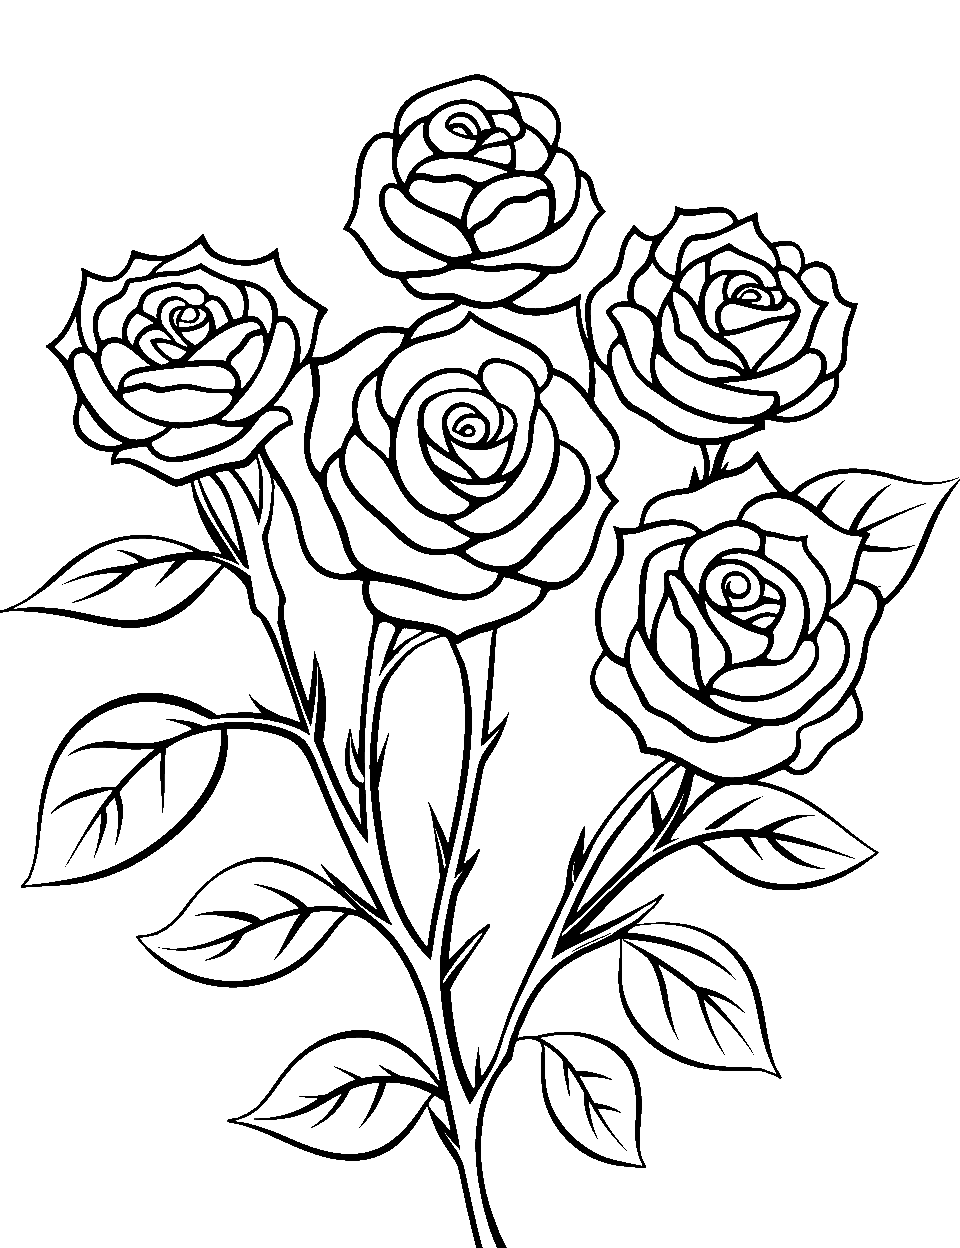 How To Draw Roses - Happy Family Art